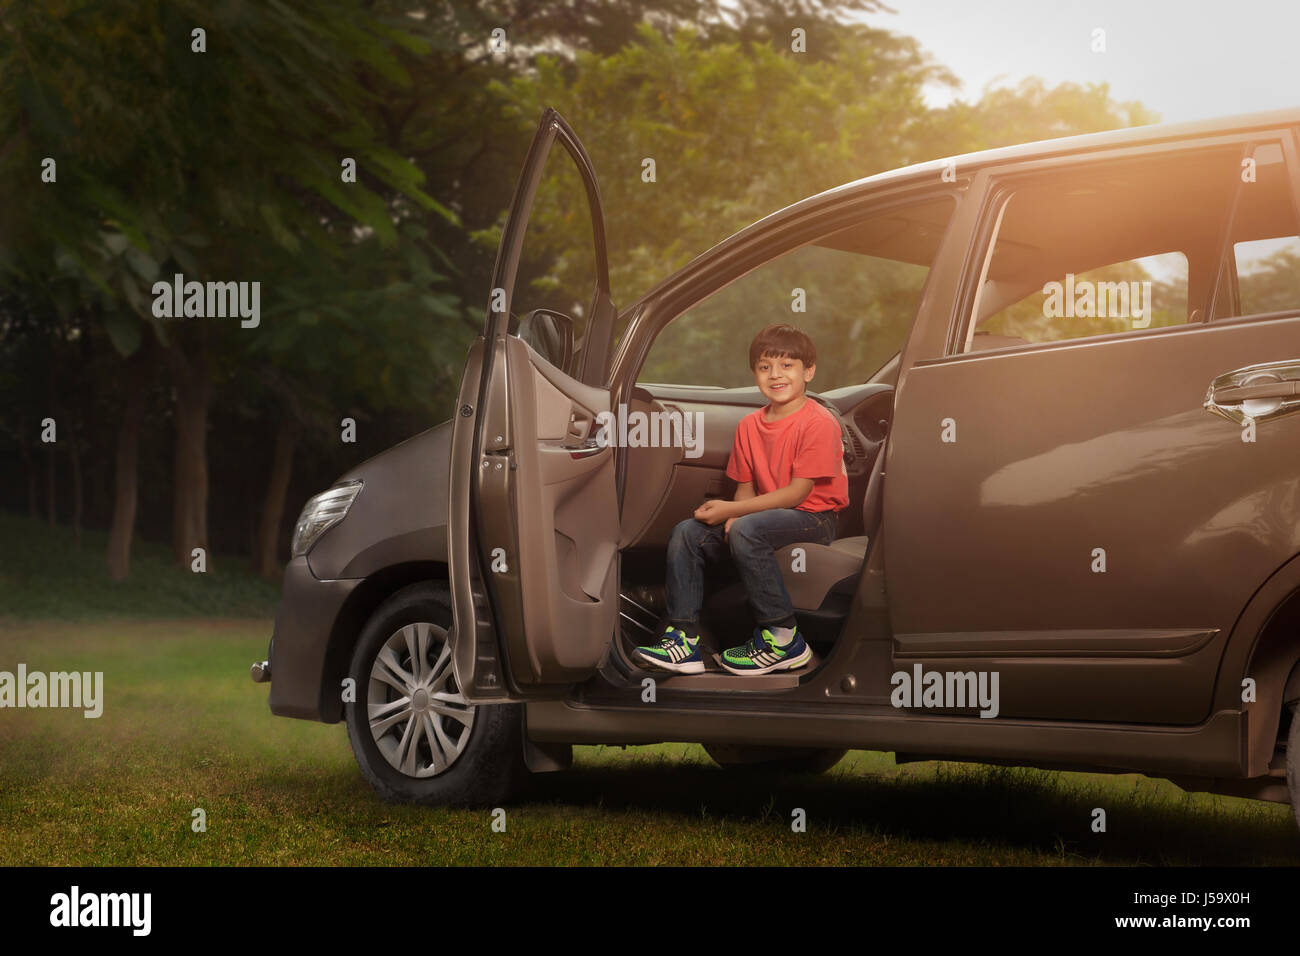 Boy sitting on car front seat in park Stock Photo